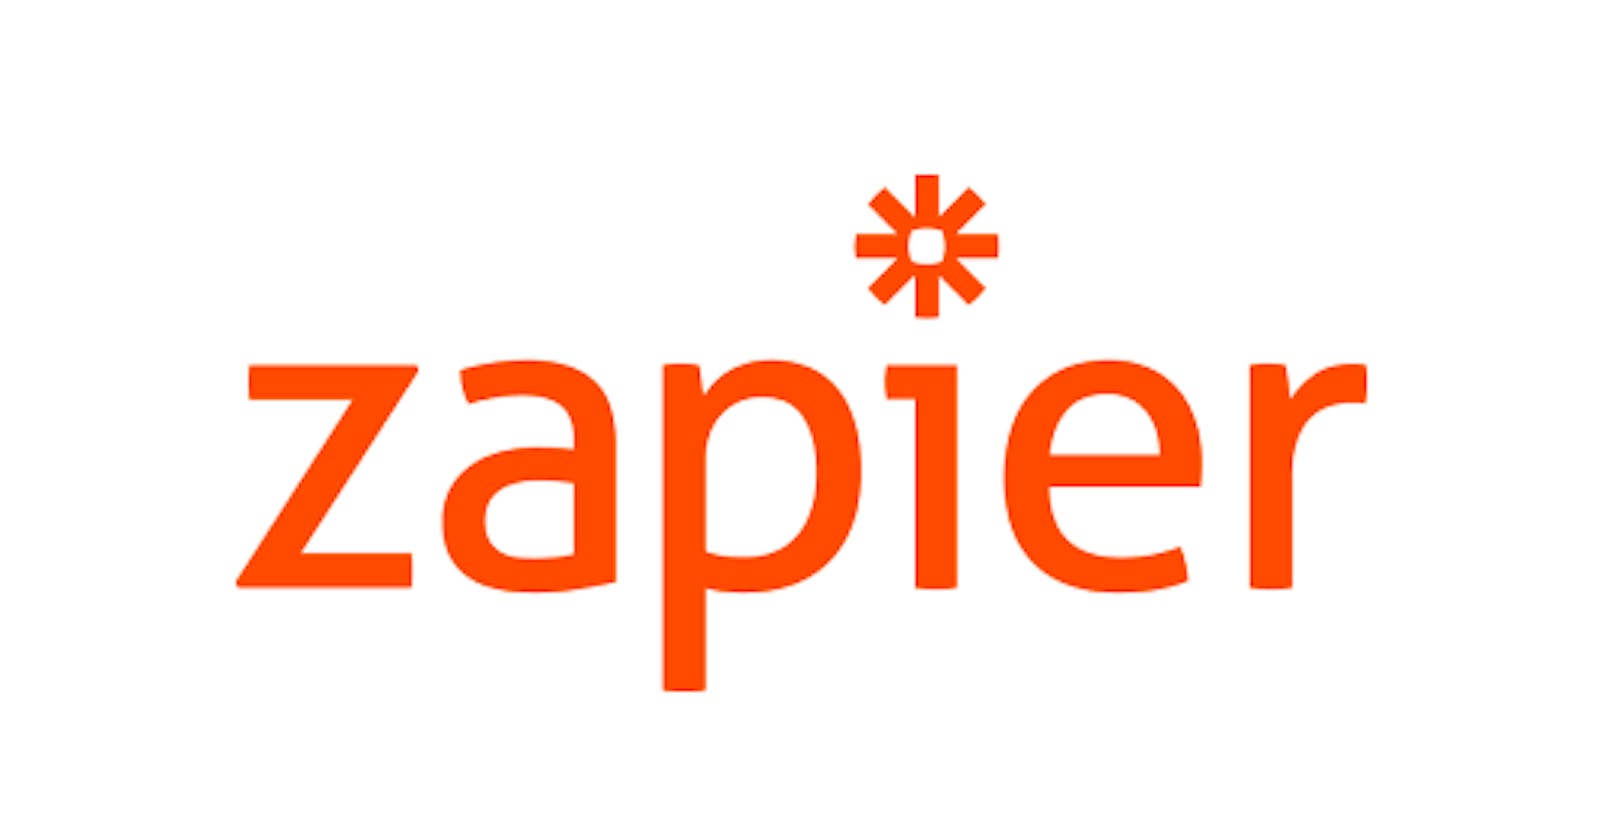 Day 3, automating tasks with Zapier